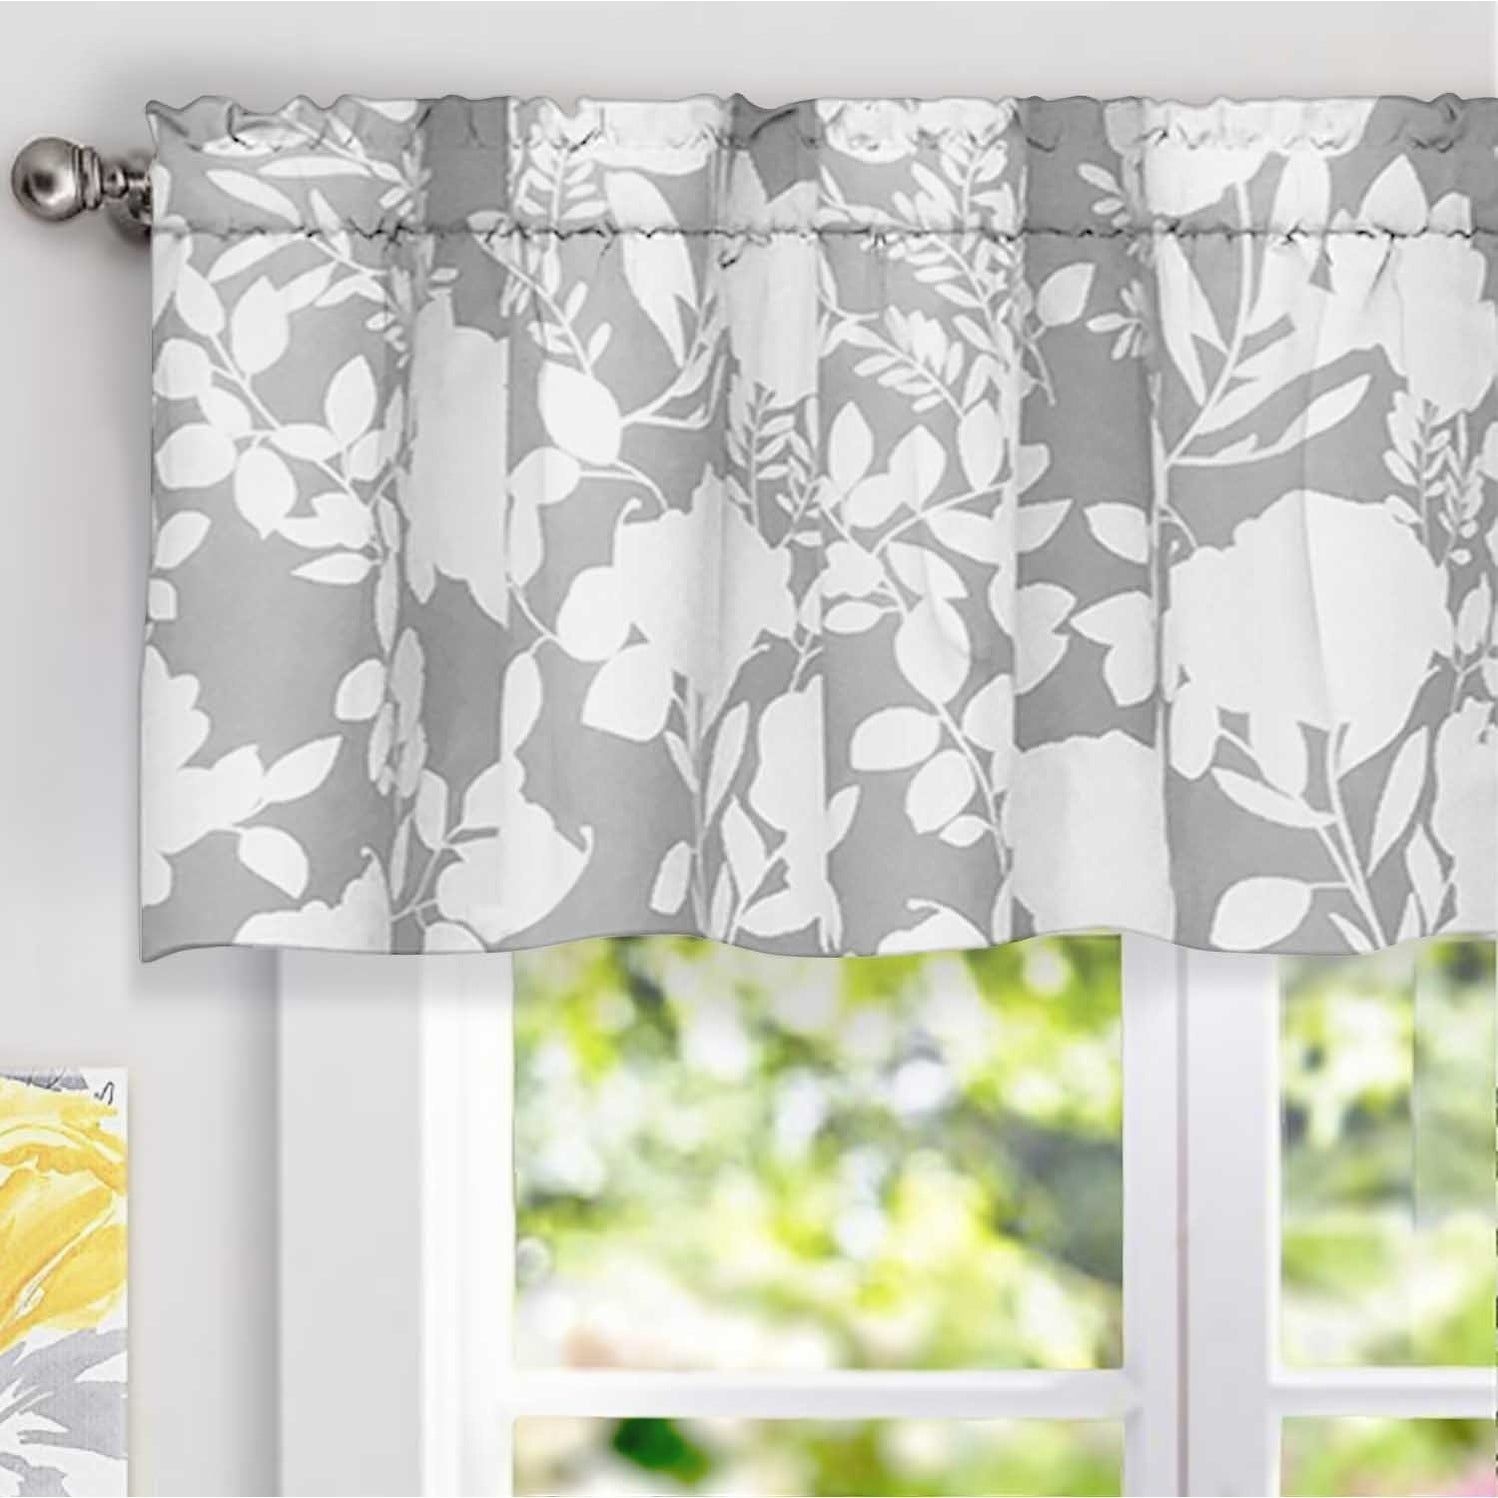 Details About Driftaway Floral Delight Botanic Pattern Window Valance – 52 Pertaining To Floral Pattern Window Valances (Photo 3 of 20)